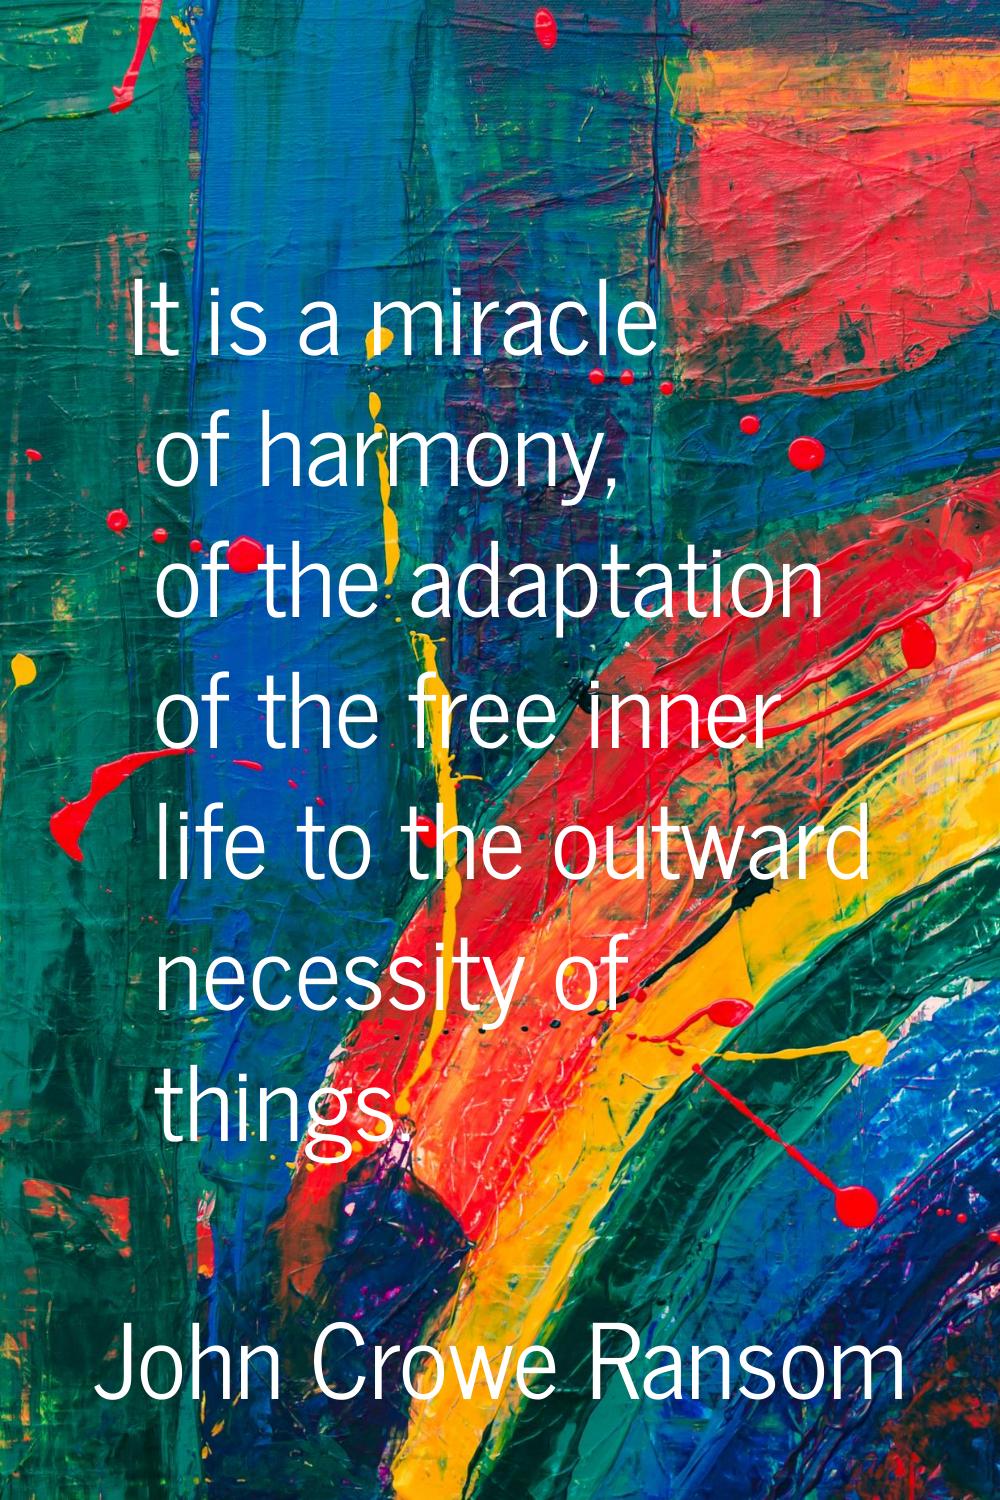 It is a miracle of harmony, of the adaptation of the free inner life to the outward necessity of th